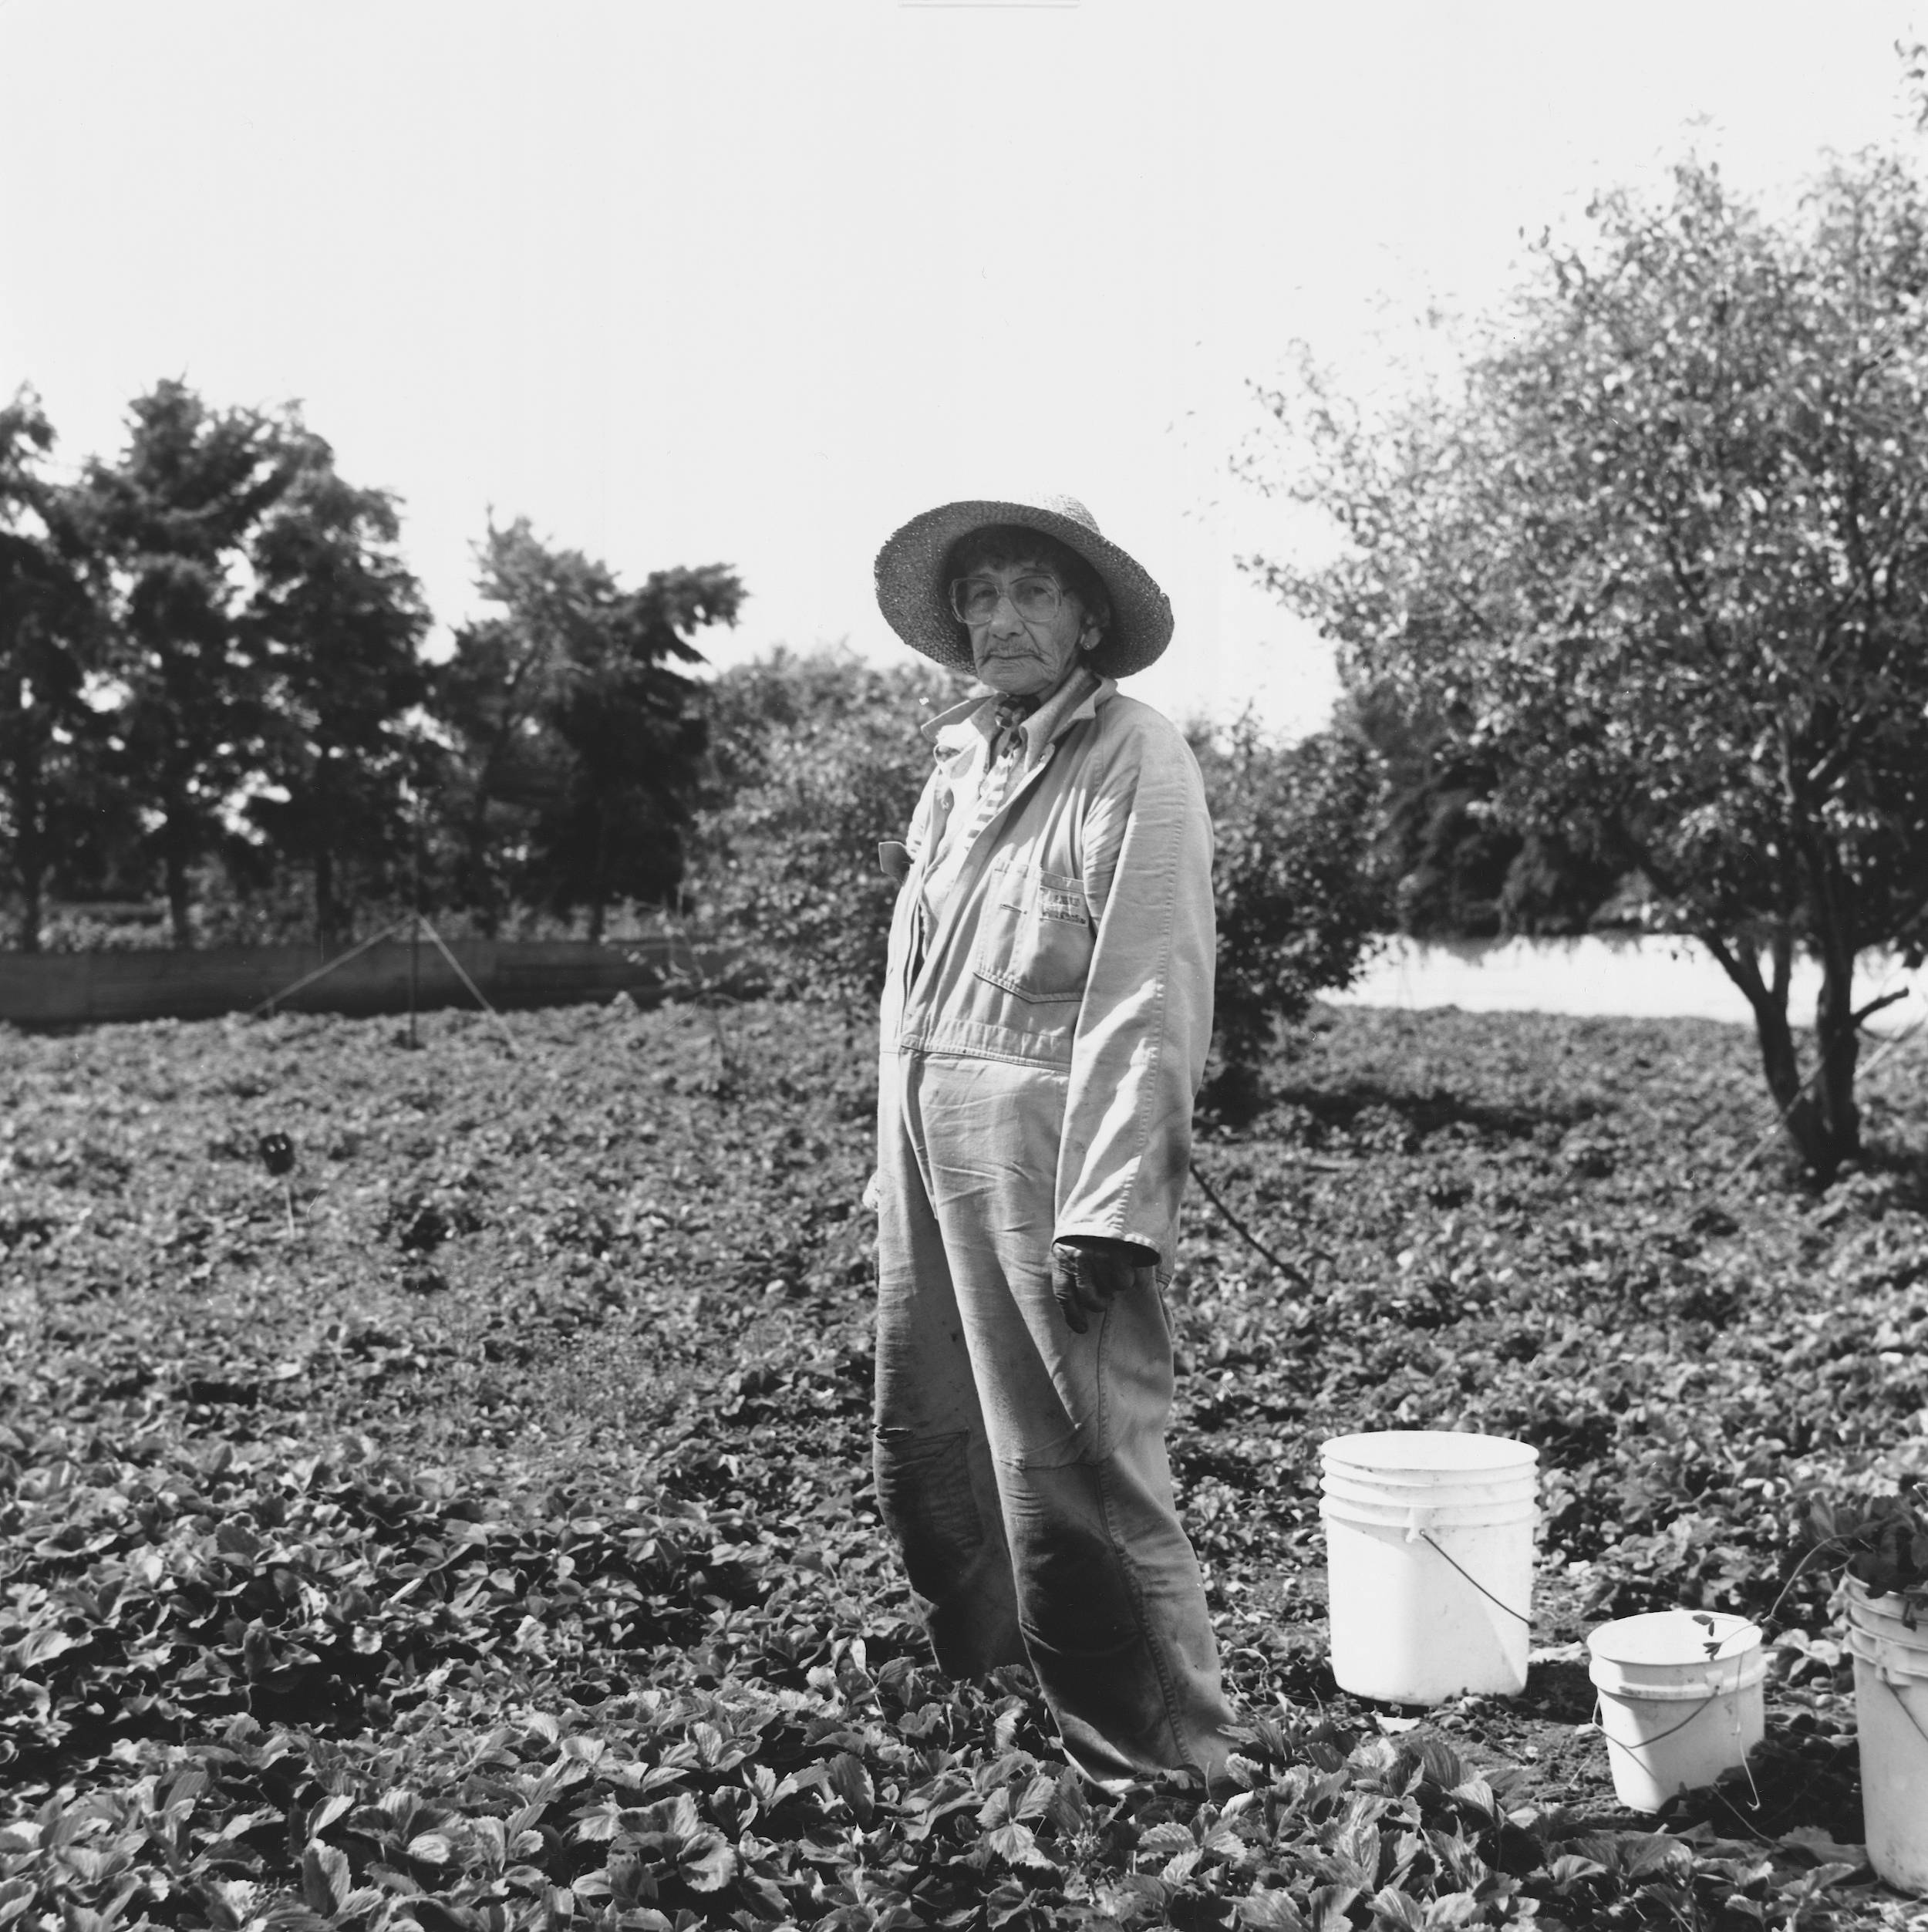 Black and white photo of elderly woman standing in the middle of rural strawberry patch with white buckets beside her. The woman is wearing well used one-piece overalls.